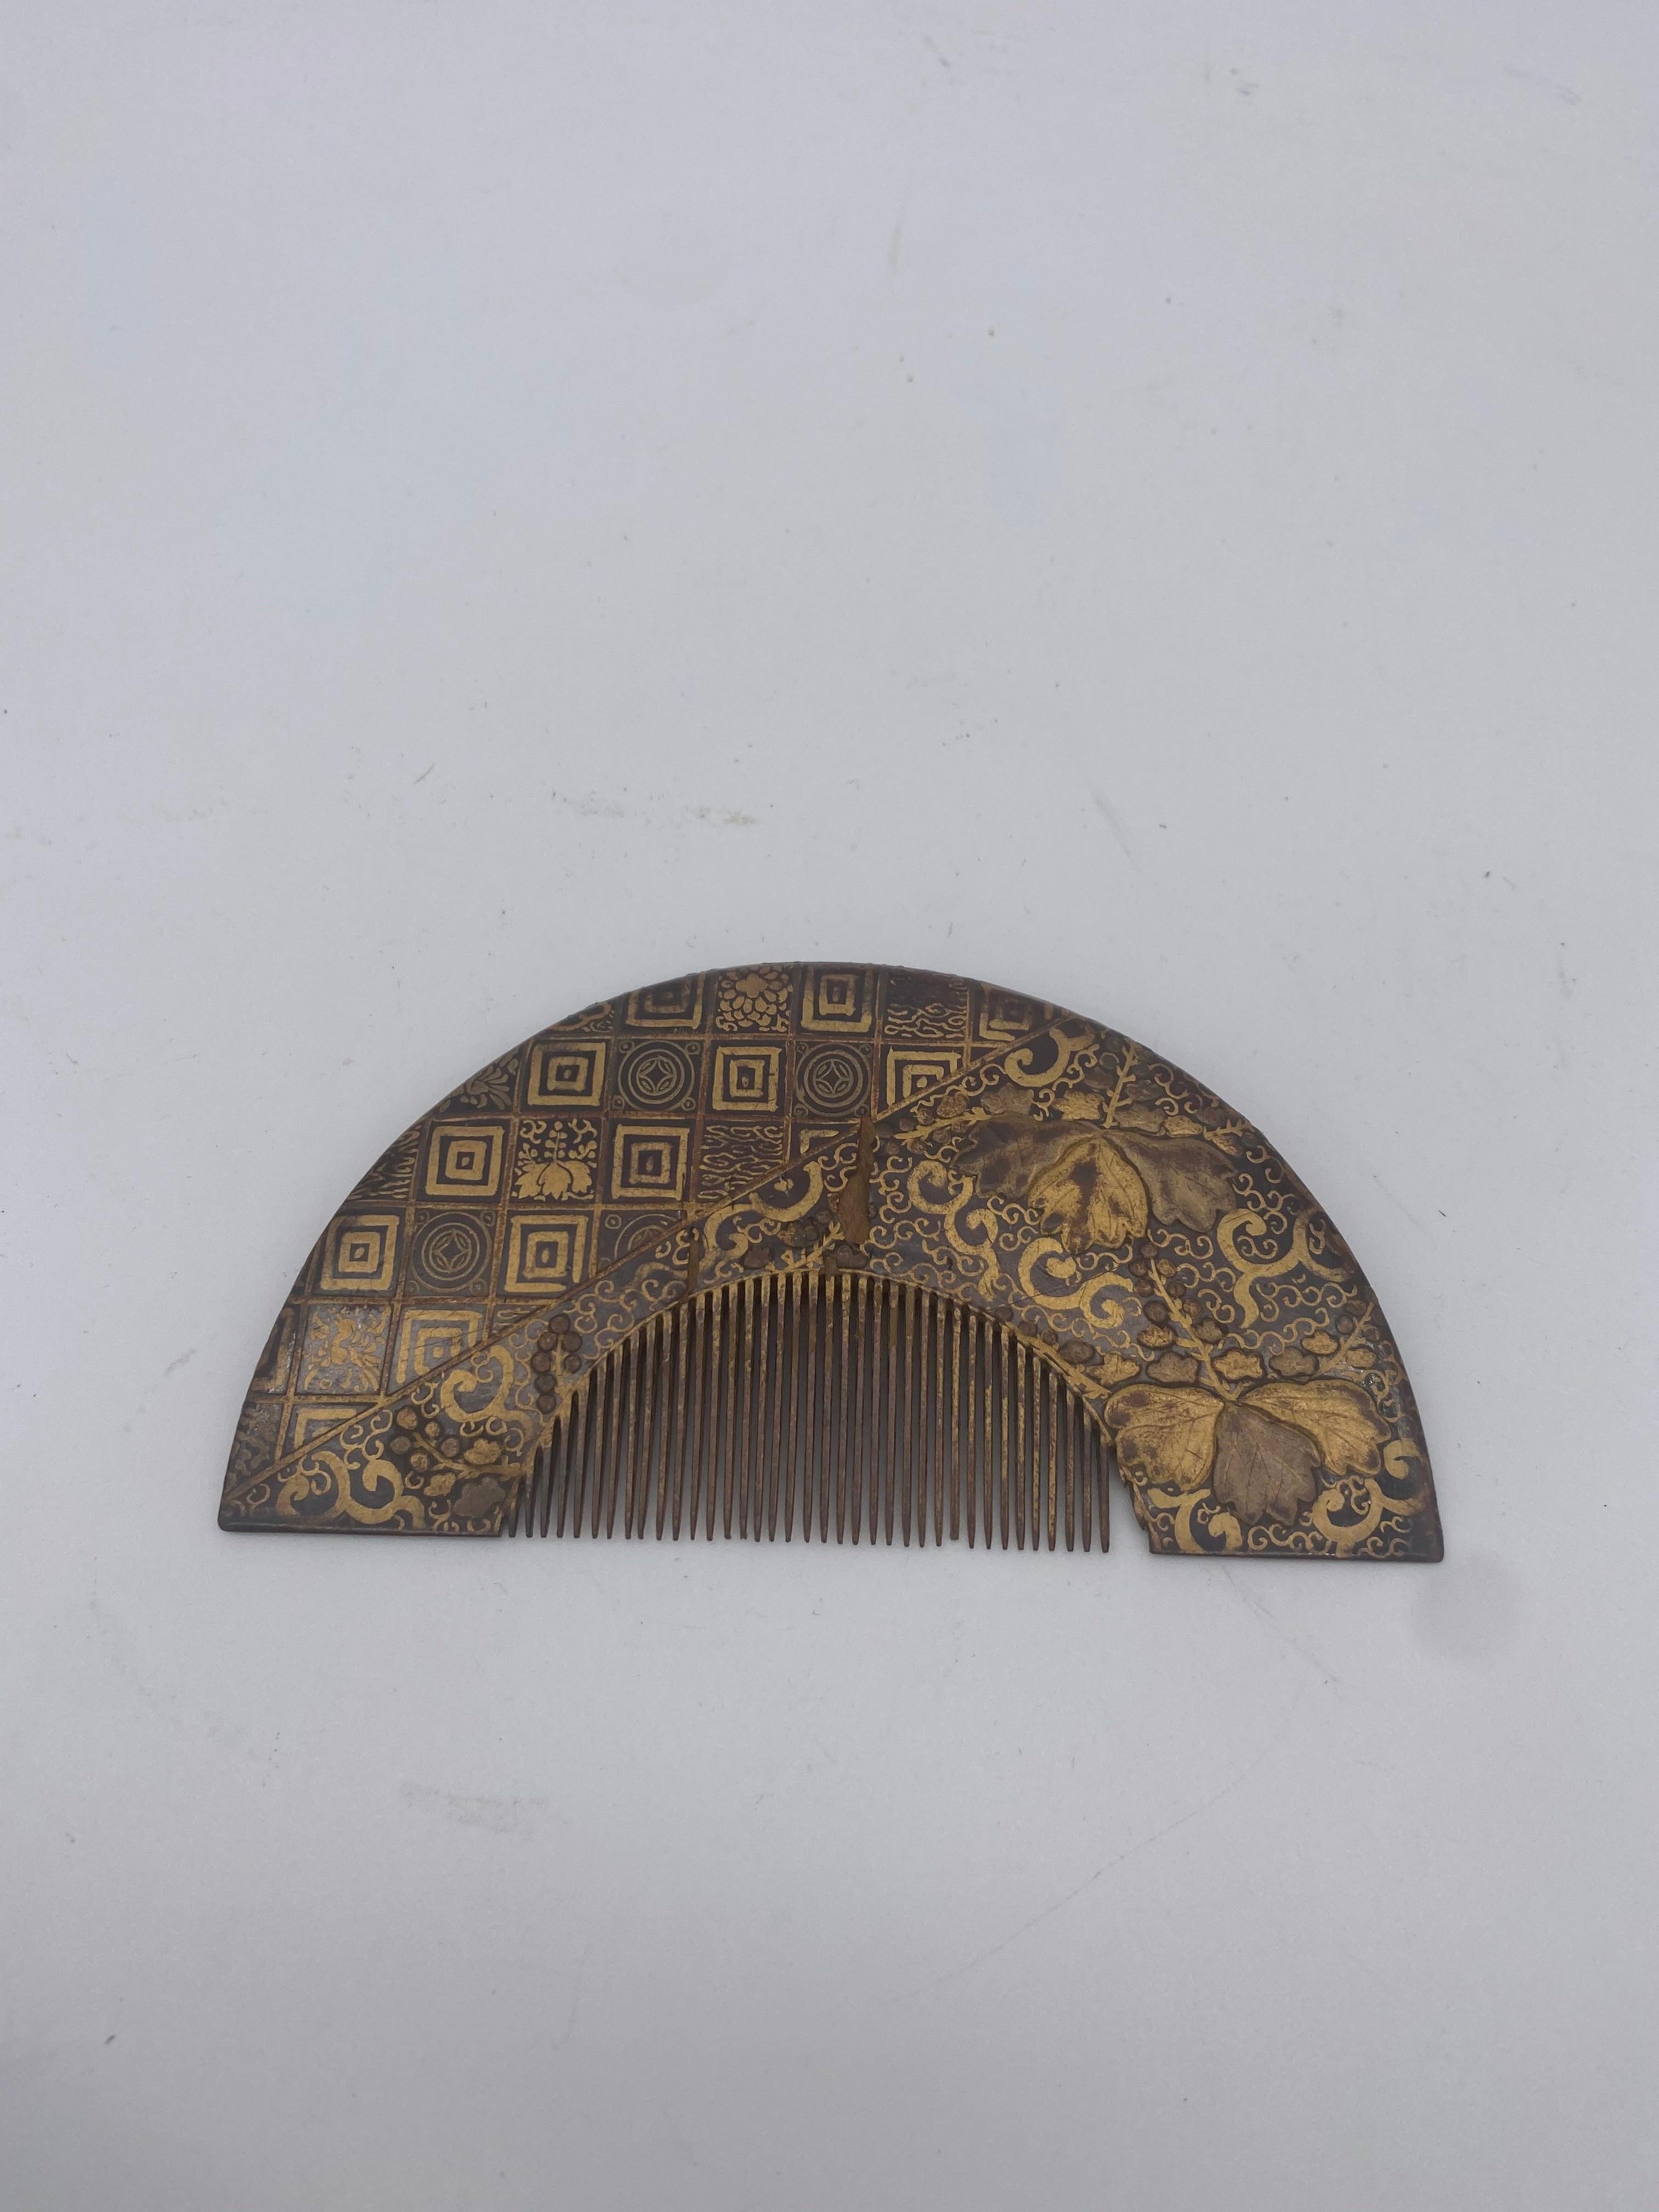 19th century gilt-decorated lacquer Chinese comb, very beautiful piece.